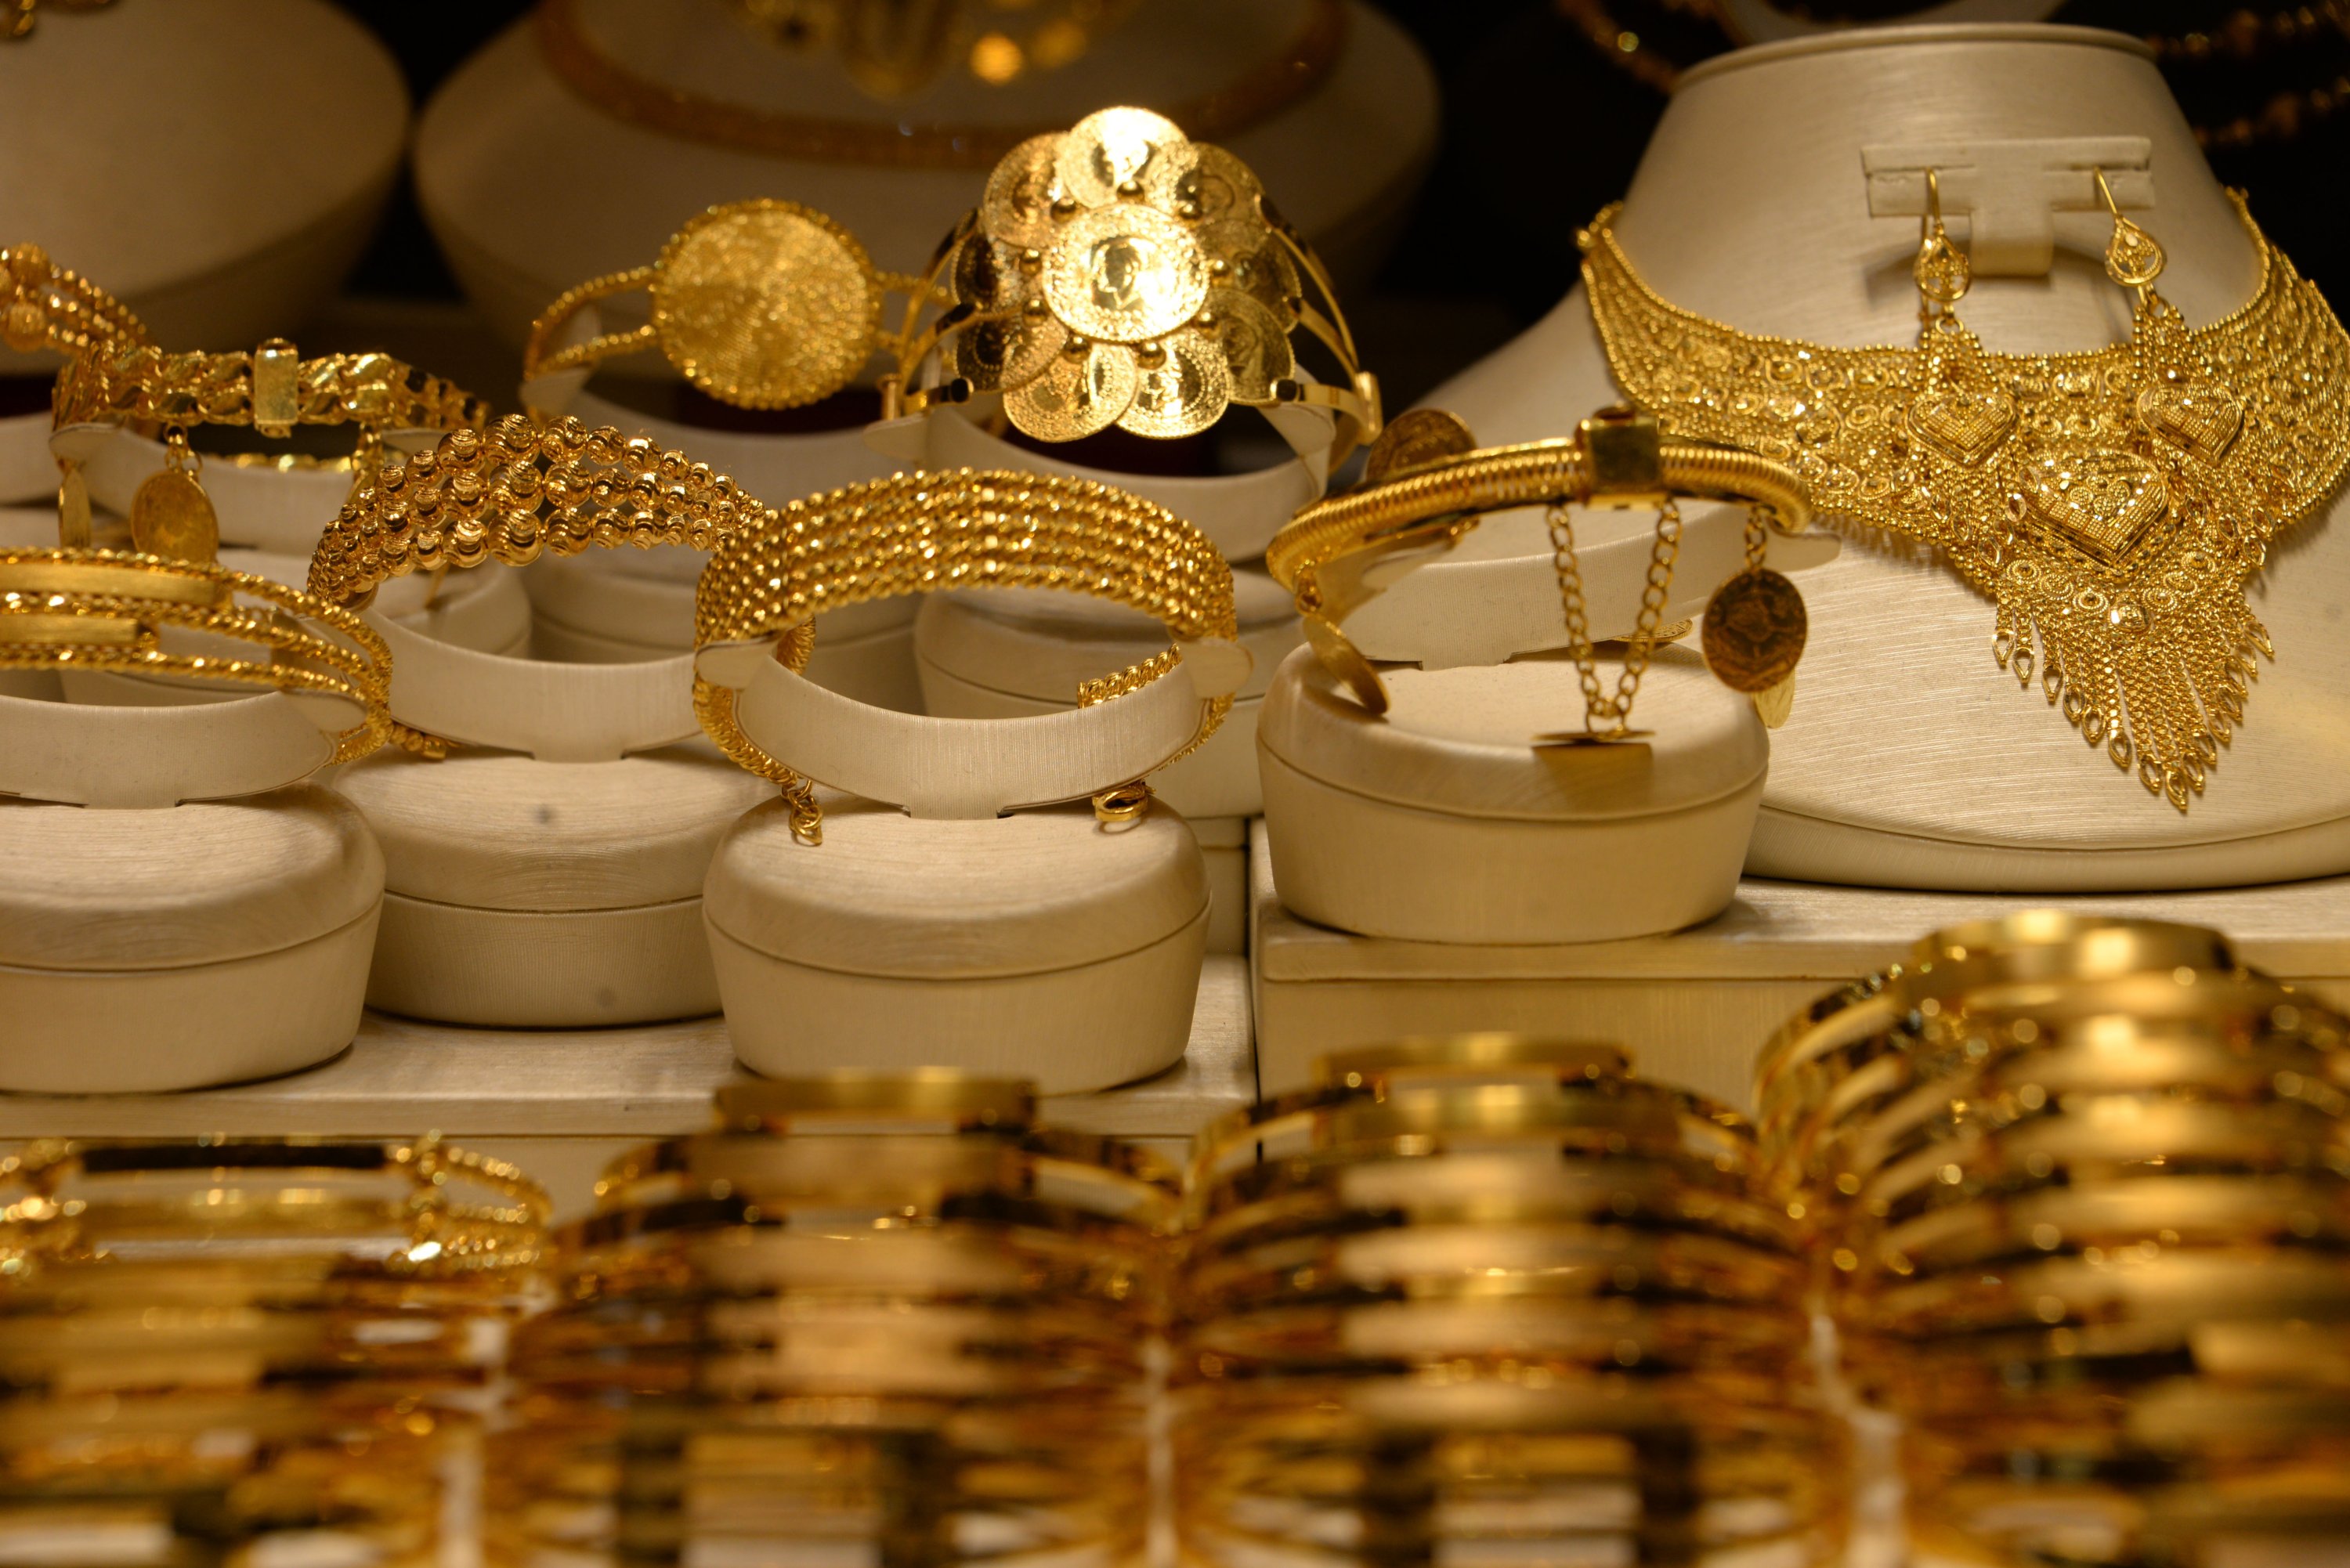 Gold bangles or jewelry are a popular choice of gift for newlyweds in Turkey. (iStock Photo)